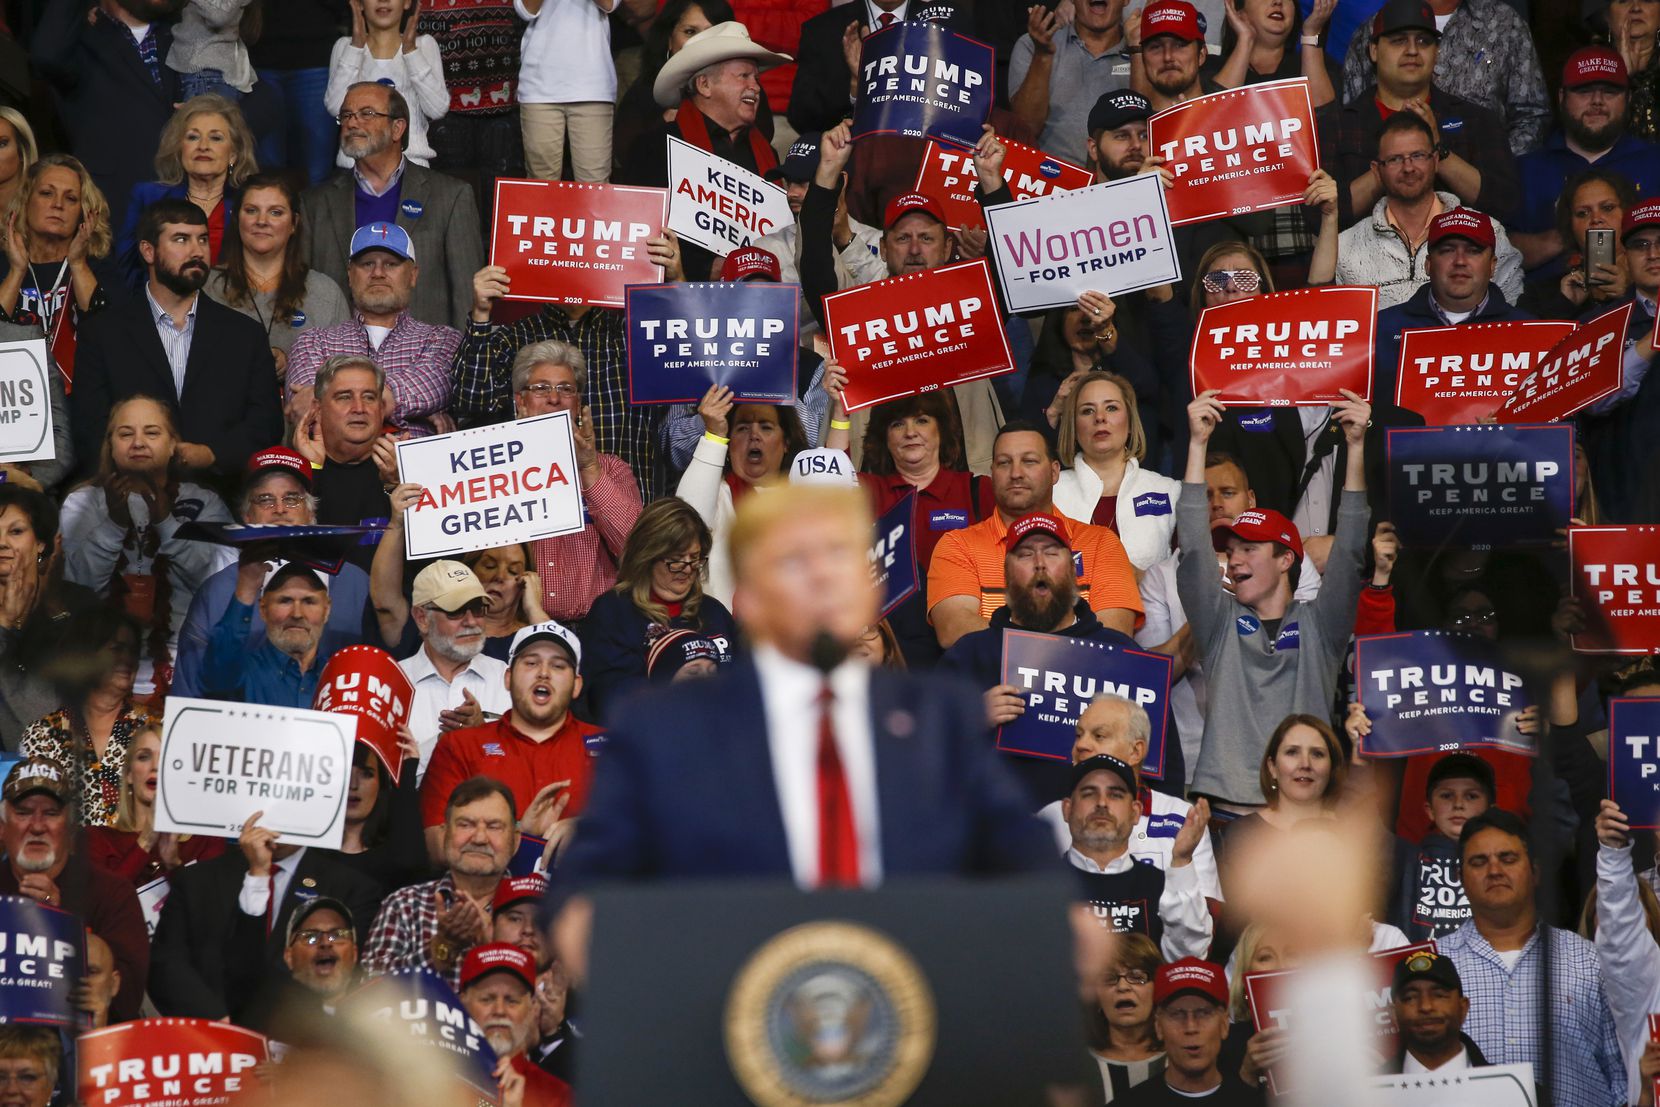 President Donald Trump spoke at a reelection rally in Bossier City, La., on Nov. 14, 2019.